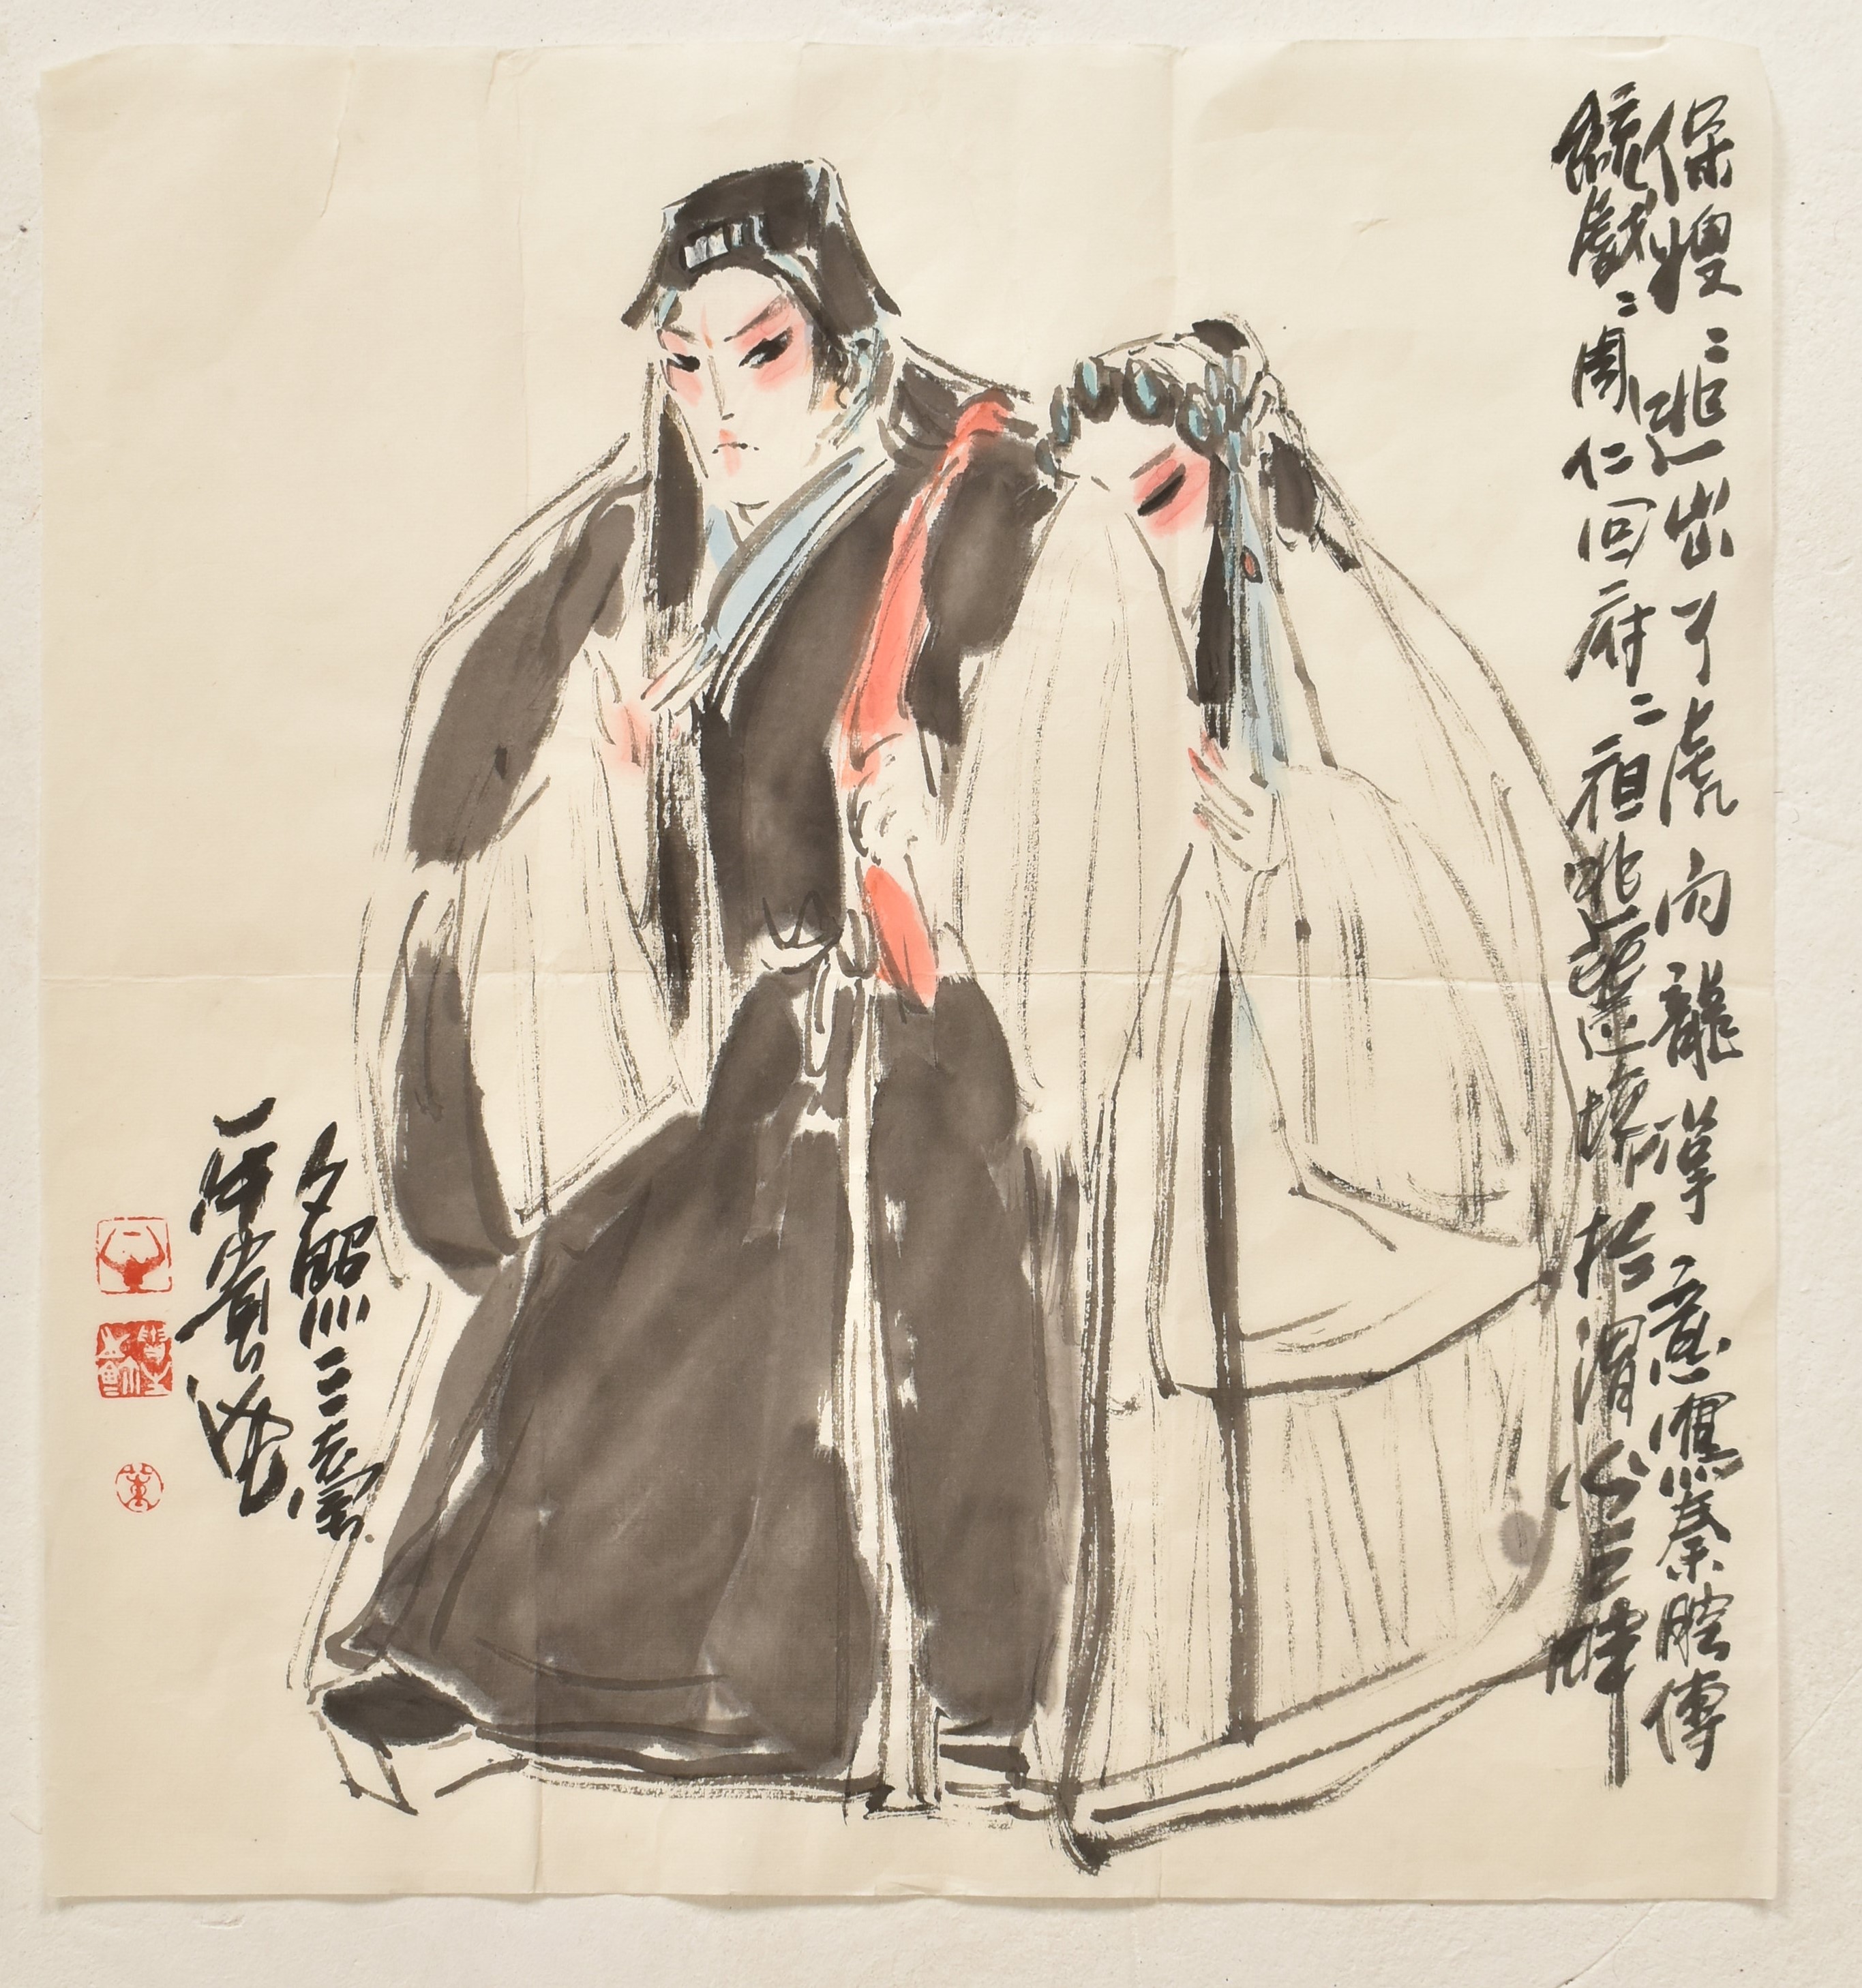 UNKNOWN - TWO PAINTINGS OF BEIJING OPERA CHARACTERS 京剧人物 - Image 6 of 10